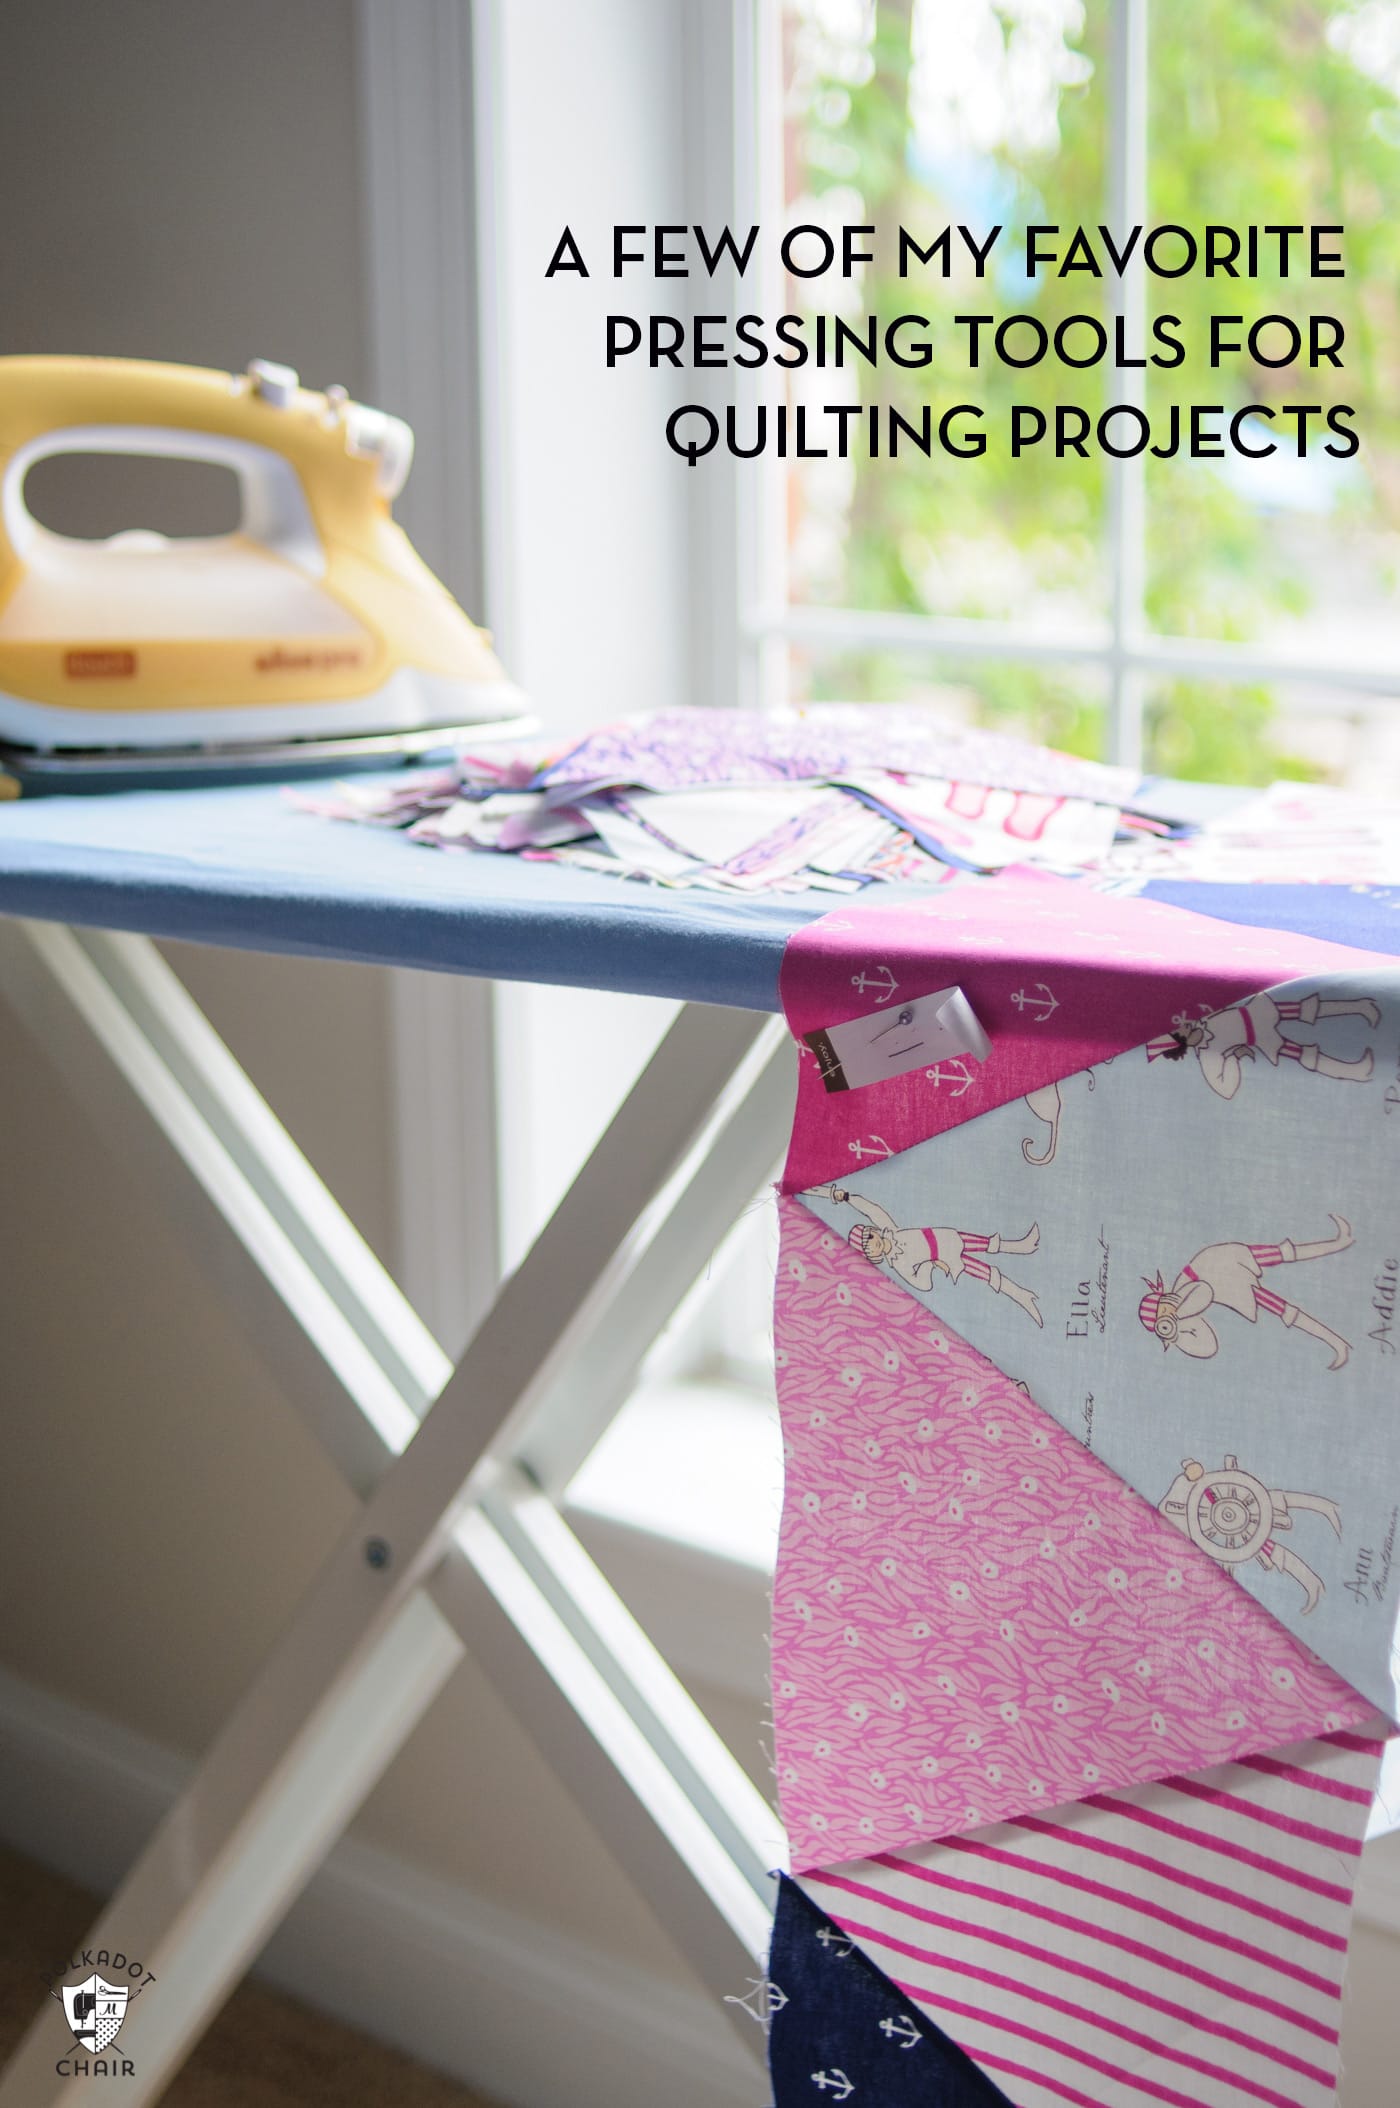 Our Favorite Small Iron for Quilting